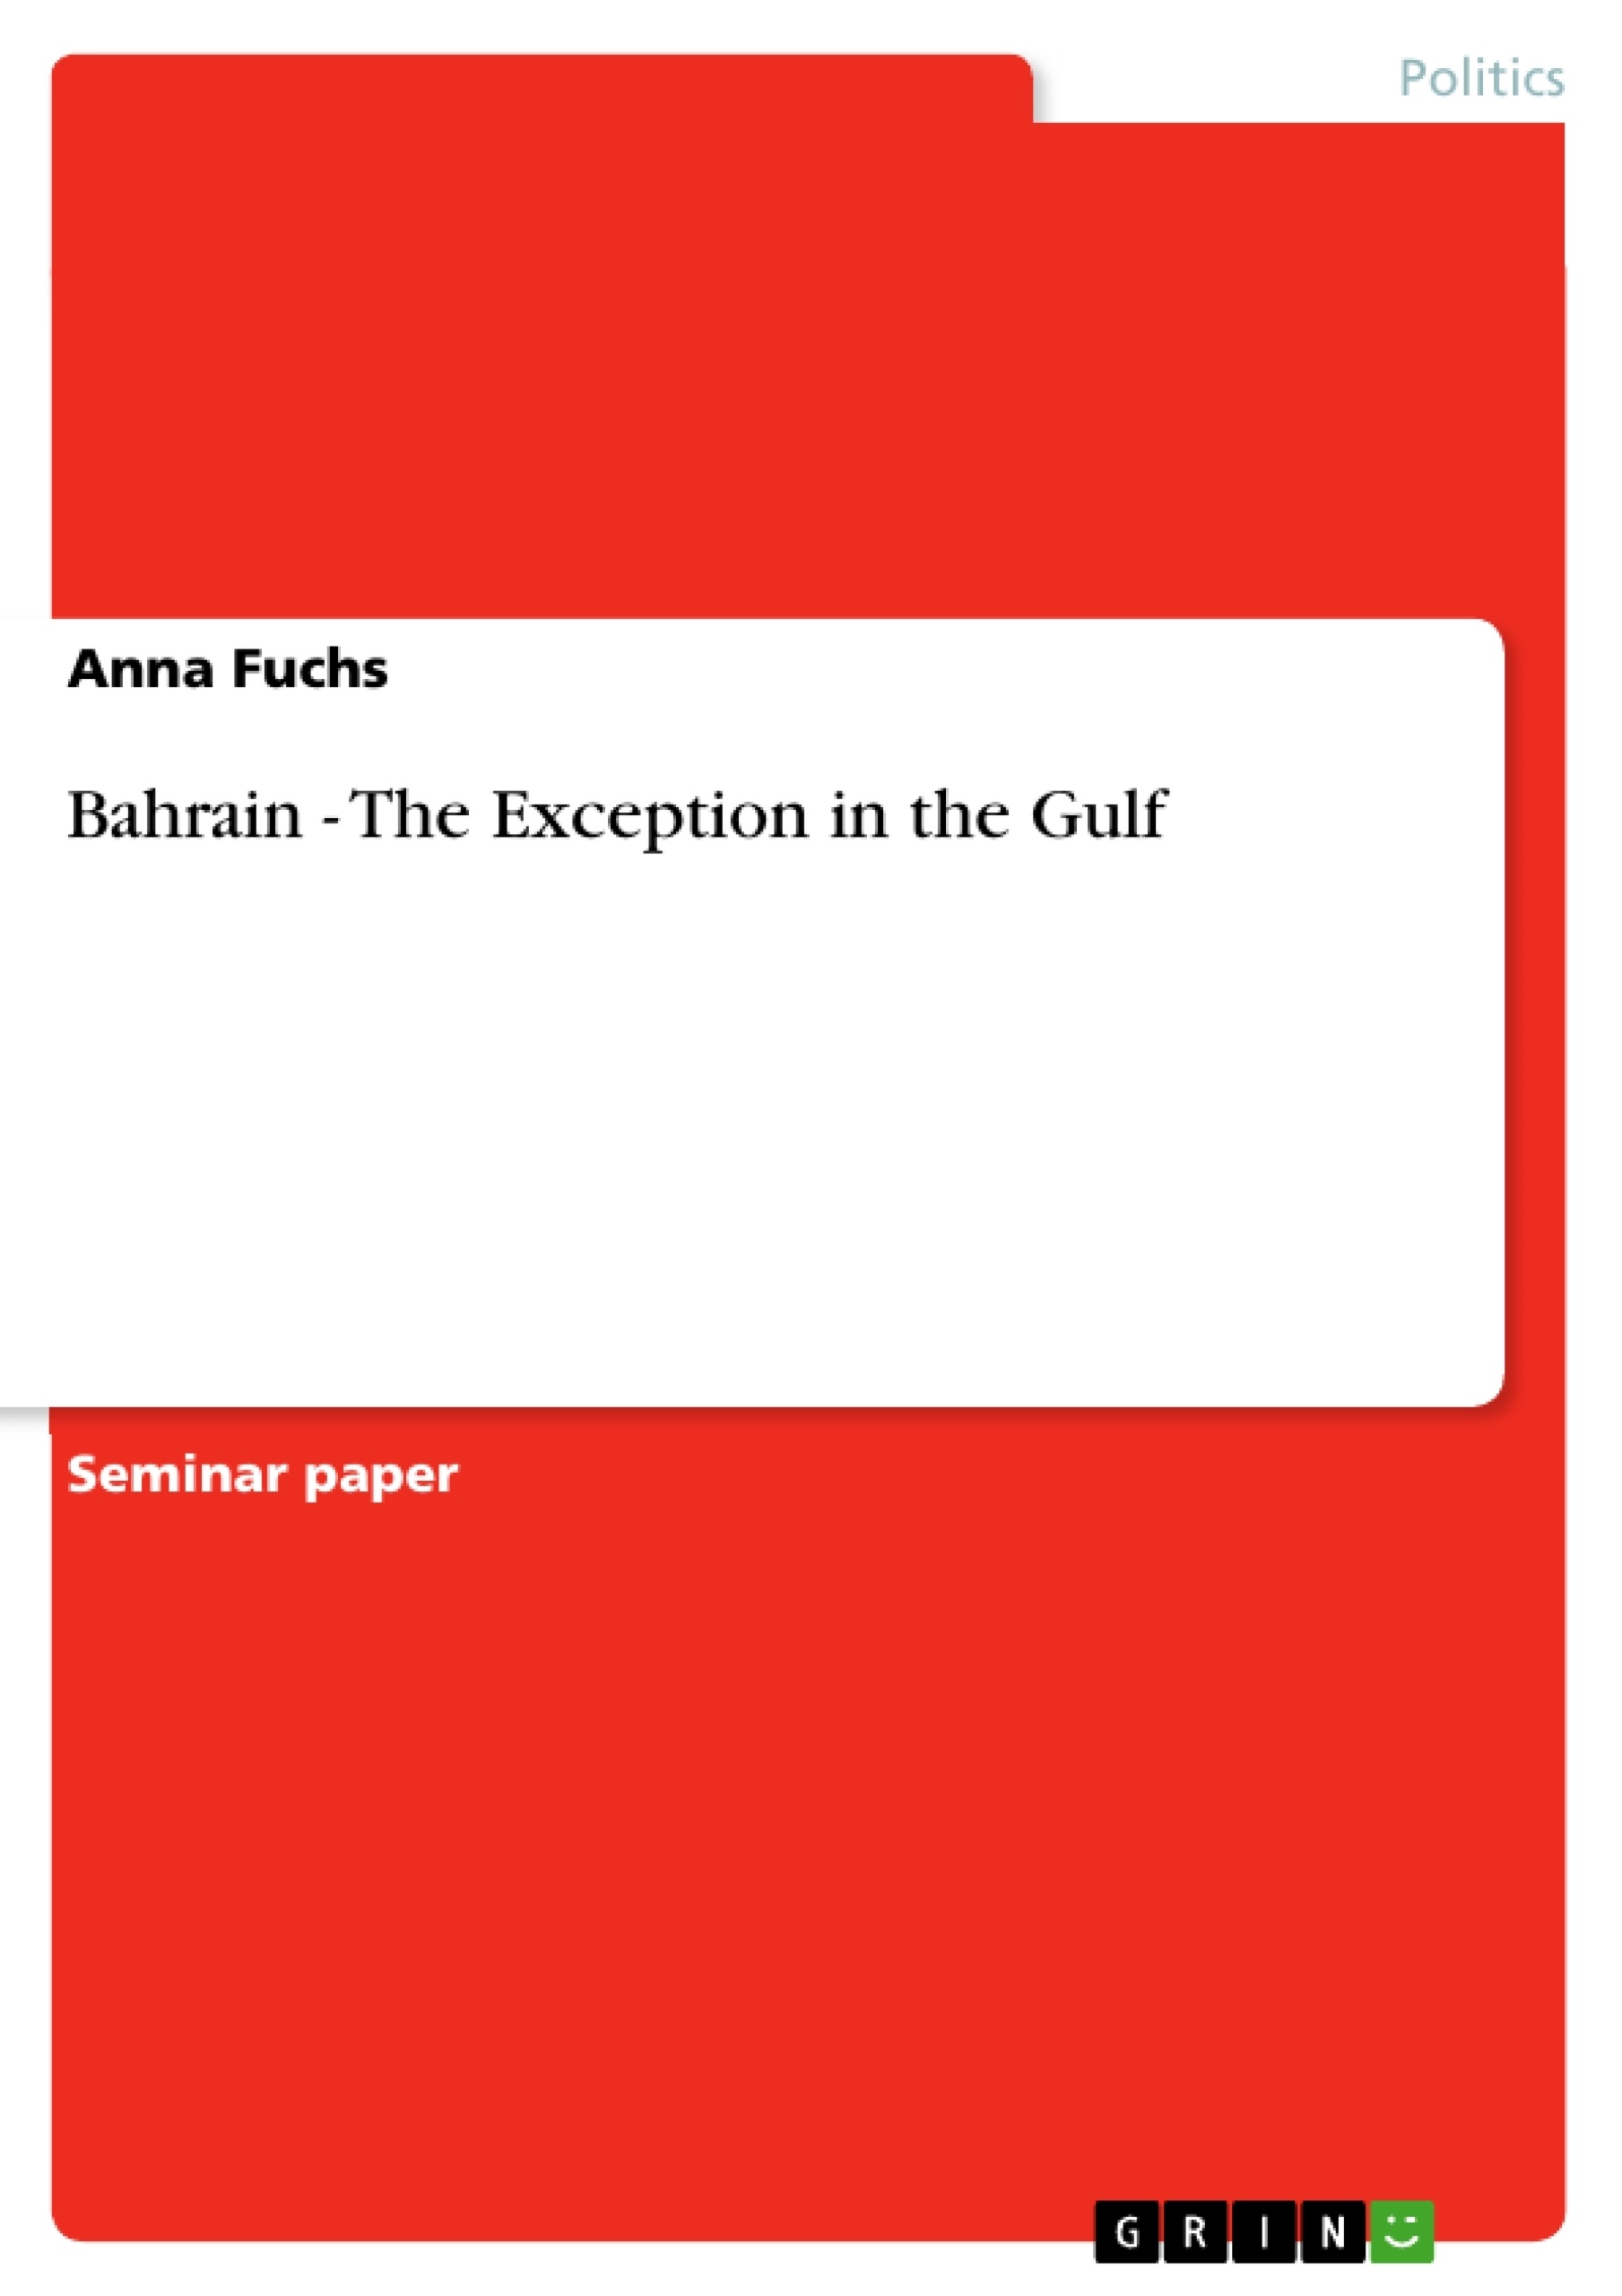 Titre: Bahrain - The Exception in the Gulf